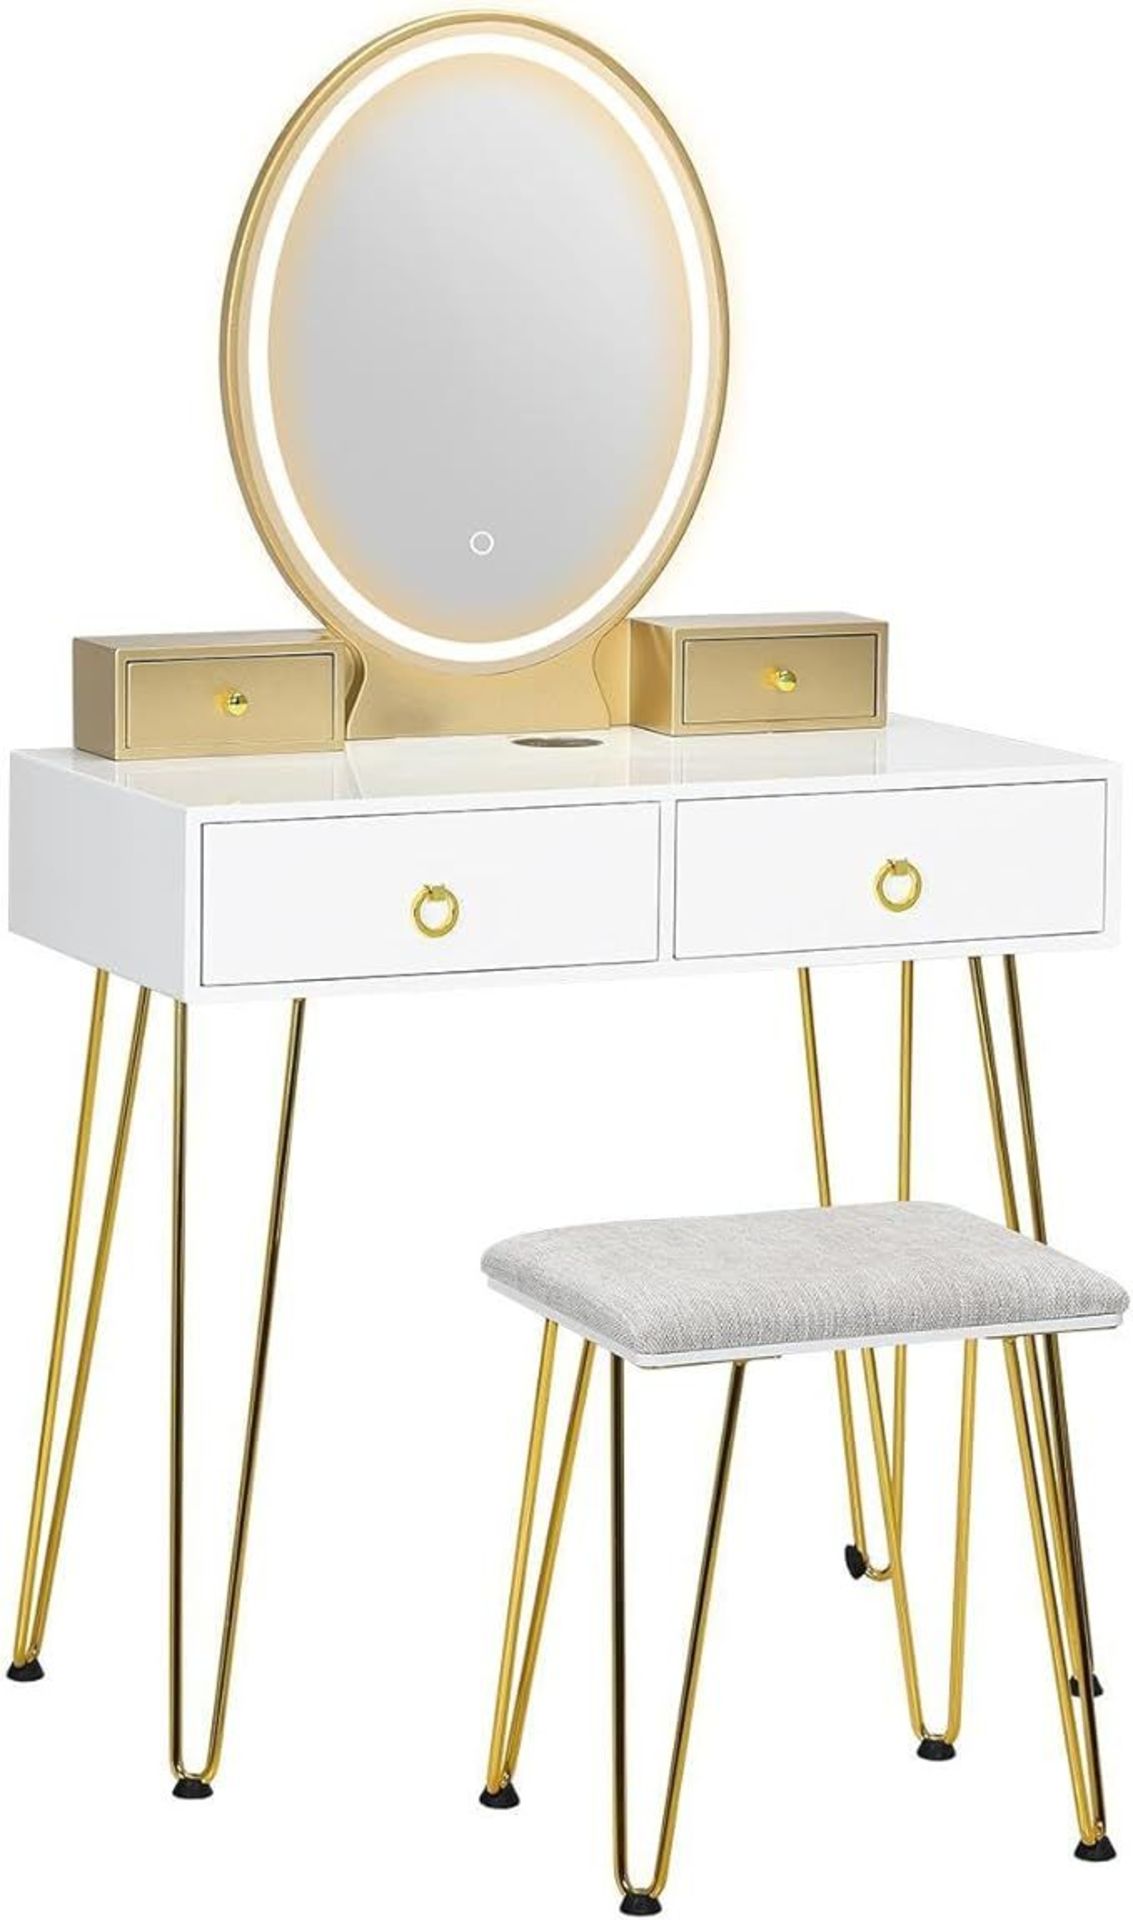 Multigot Dressing Table with Mirror and Stool, Vanity Makeup Desk with Detachable LED Mirror and